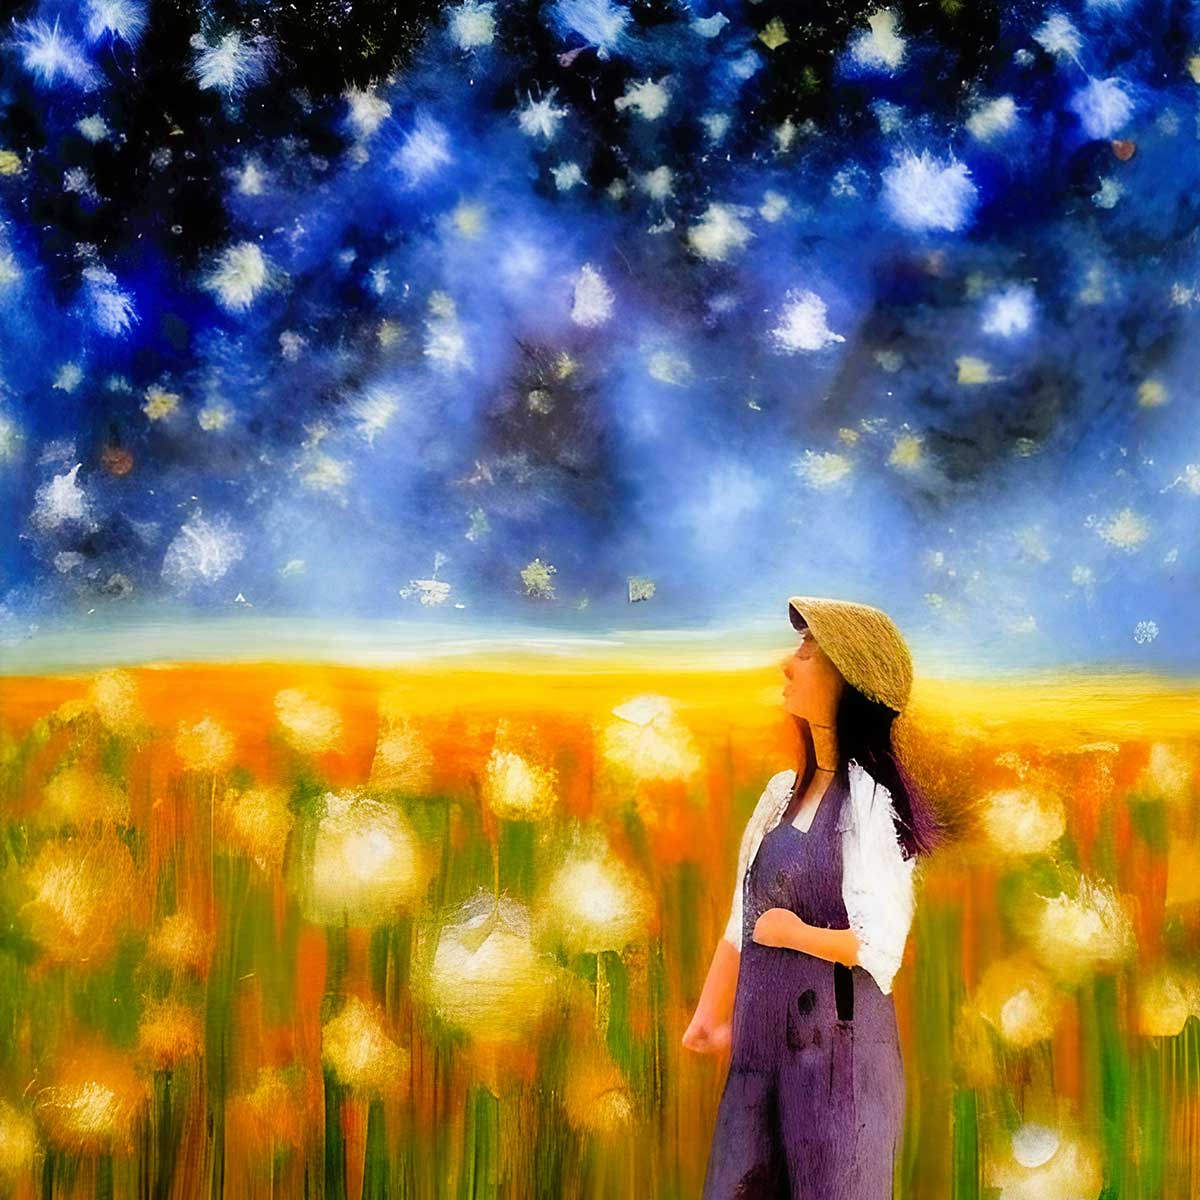 Illustration of woman standing in field under a starry sky.